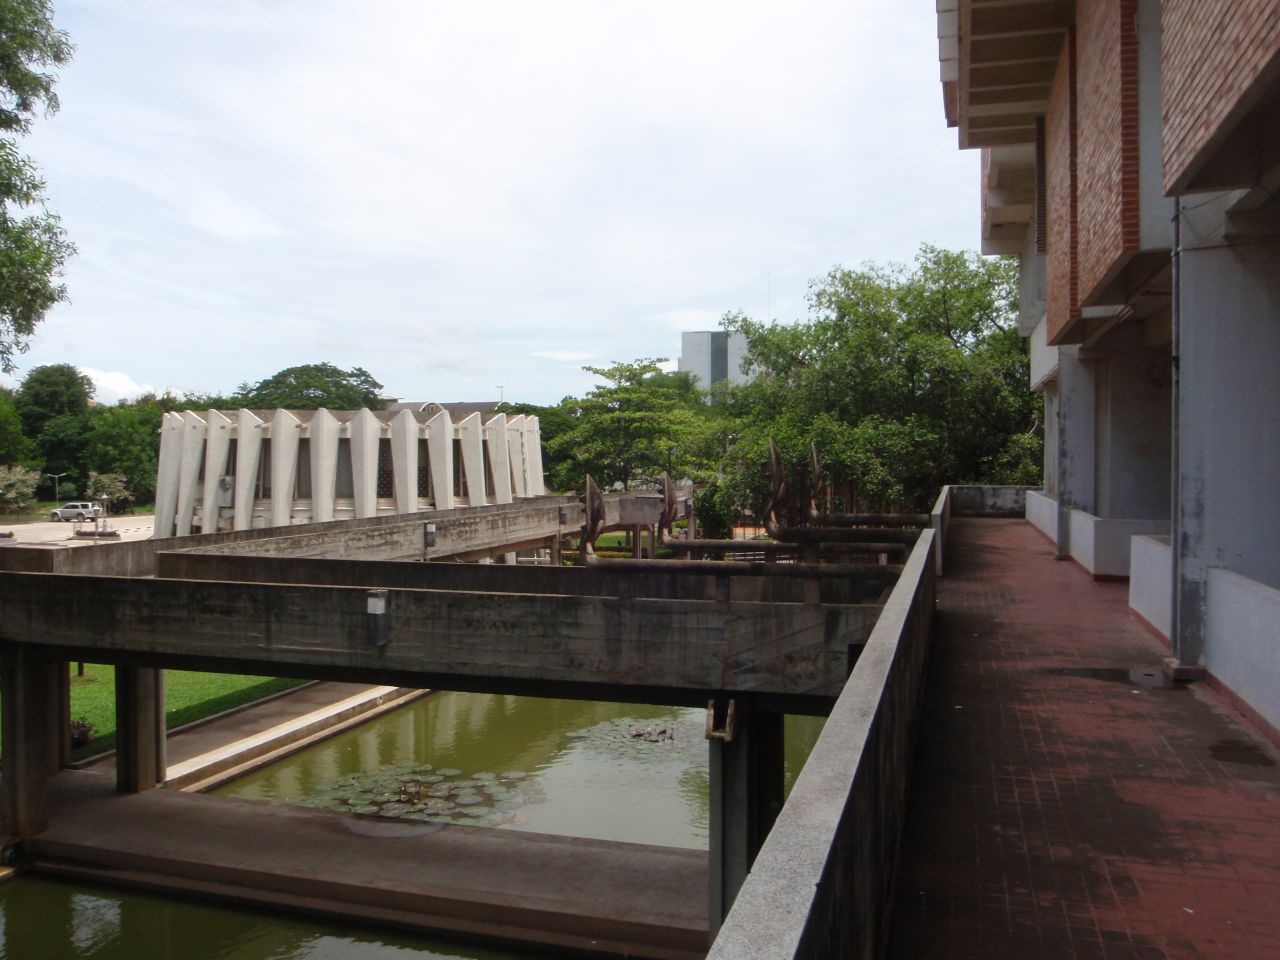 The Institute of Foreign Languages features elevated walkways and baray, a rectangular body of water that featured commonly in ancient structures from the Khmer Empire era (802-1431).